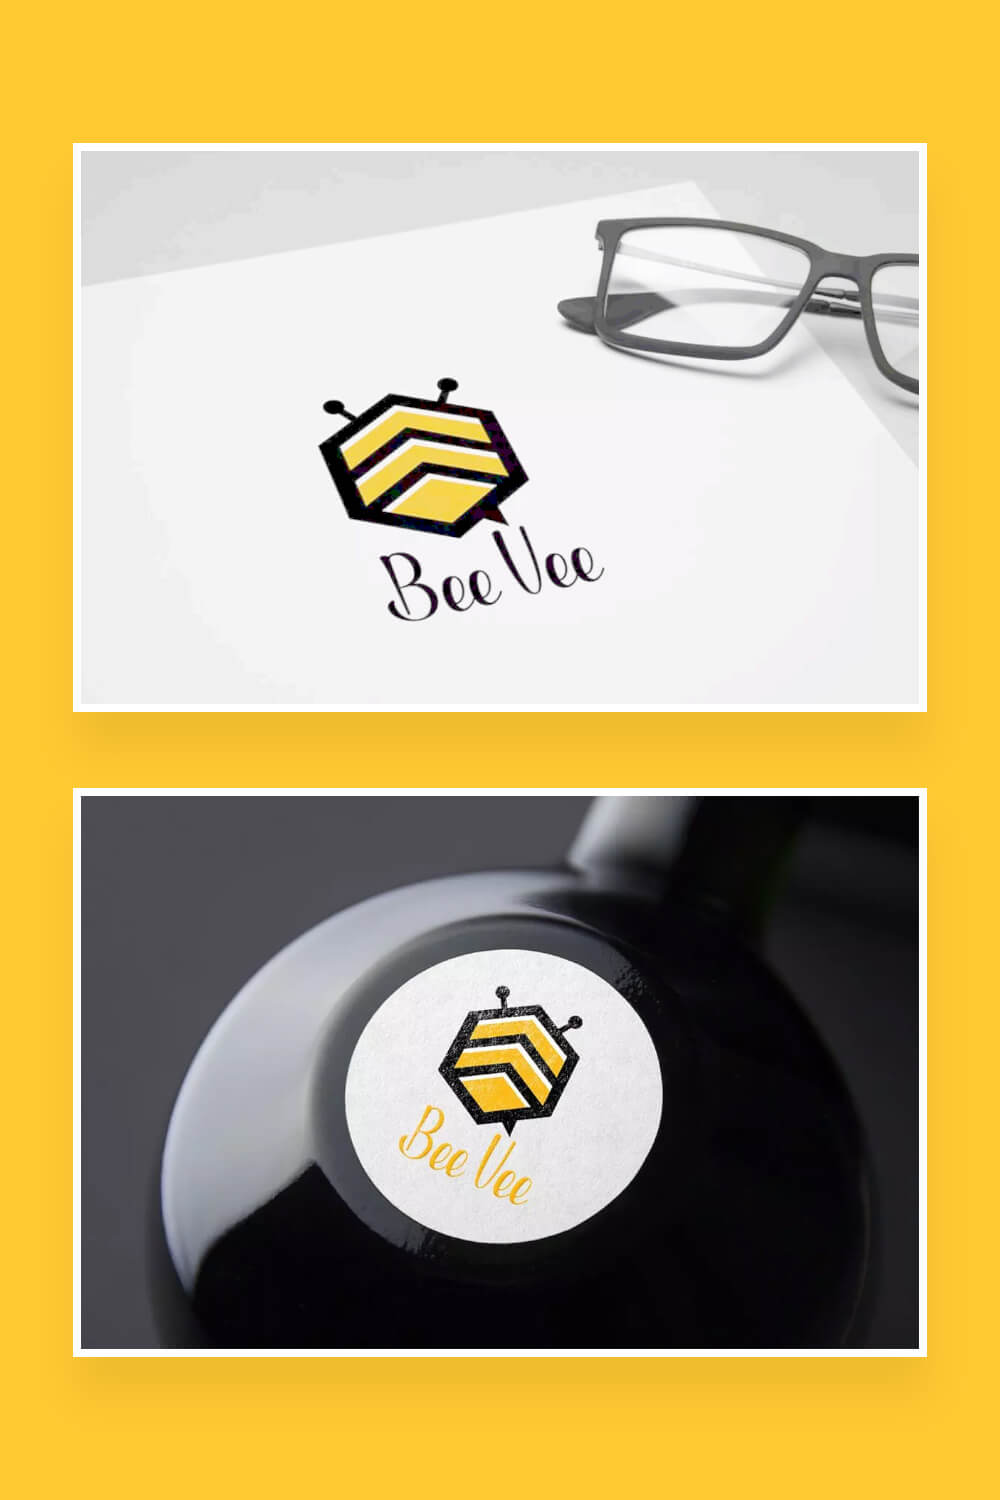 Two images of the Bee Vee logo on a black and white background.